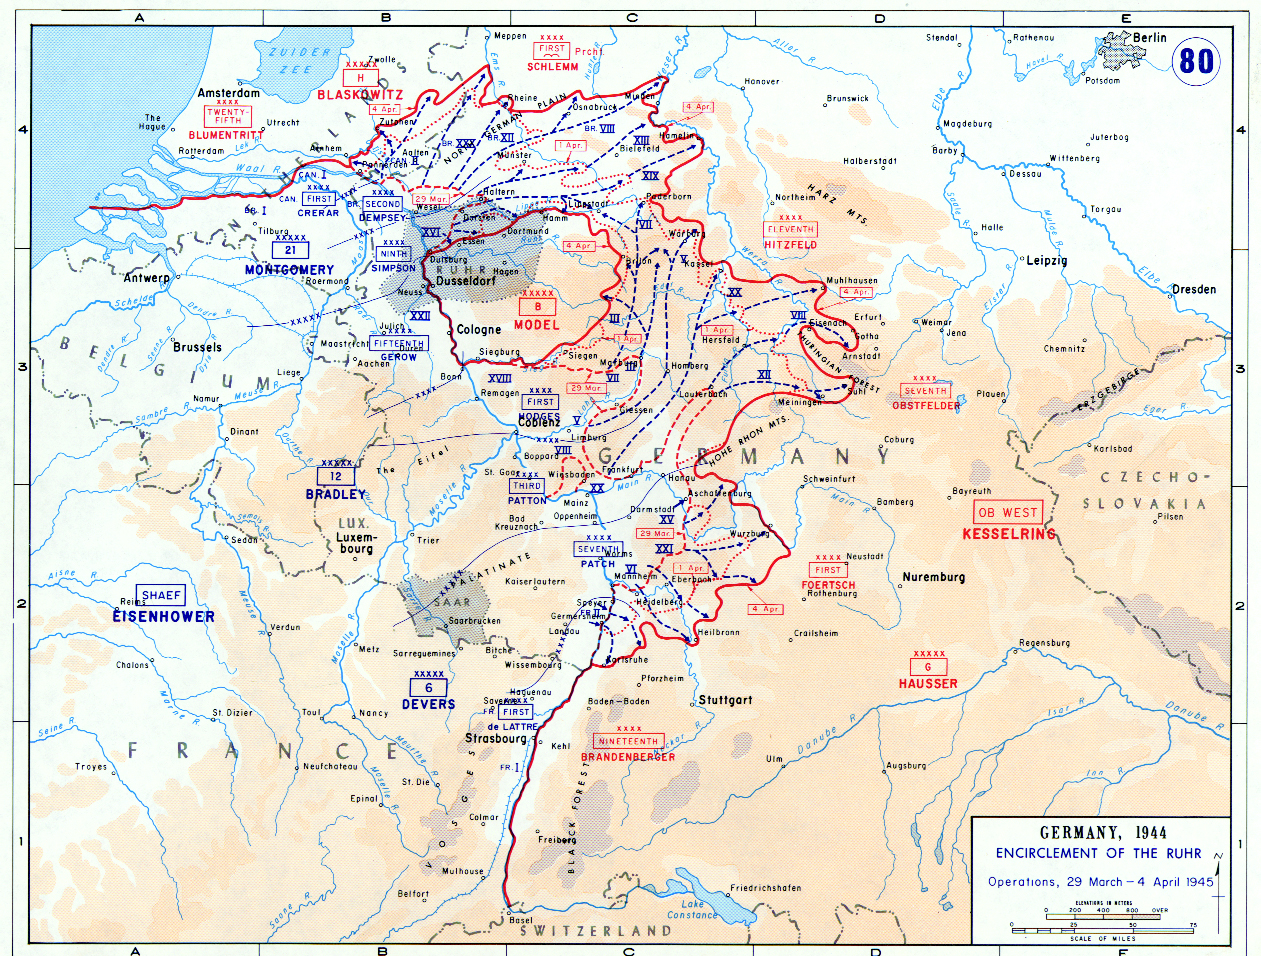 Map depicting the Allied encirclement of the Ruhr region, 29 Mar-4 Apr 1945